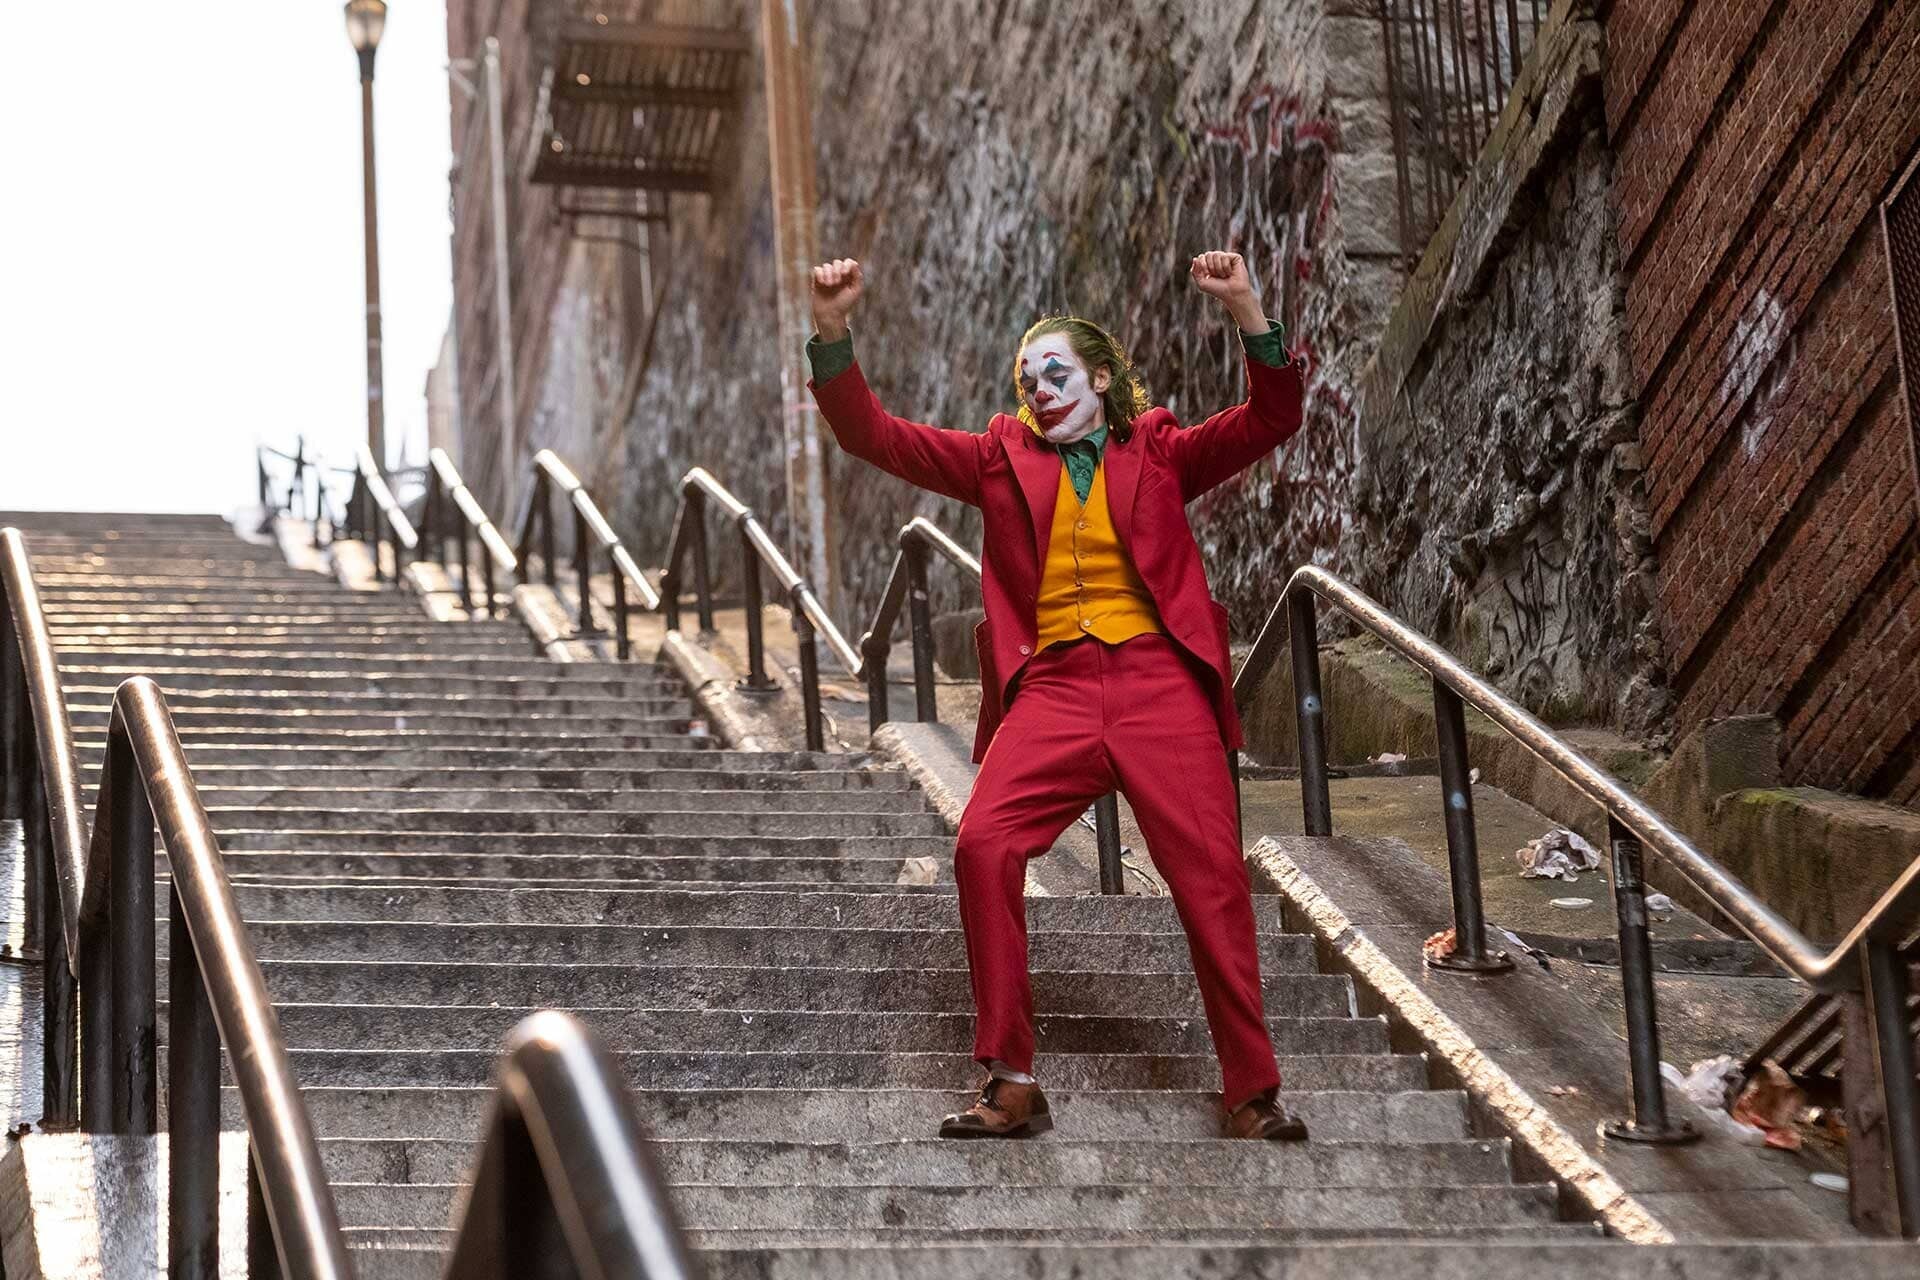 Arthur Fleck dances down the stairs in the first Joker film.